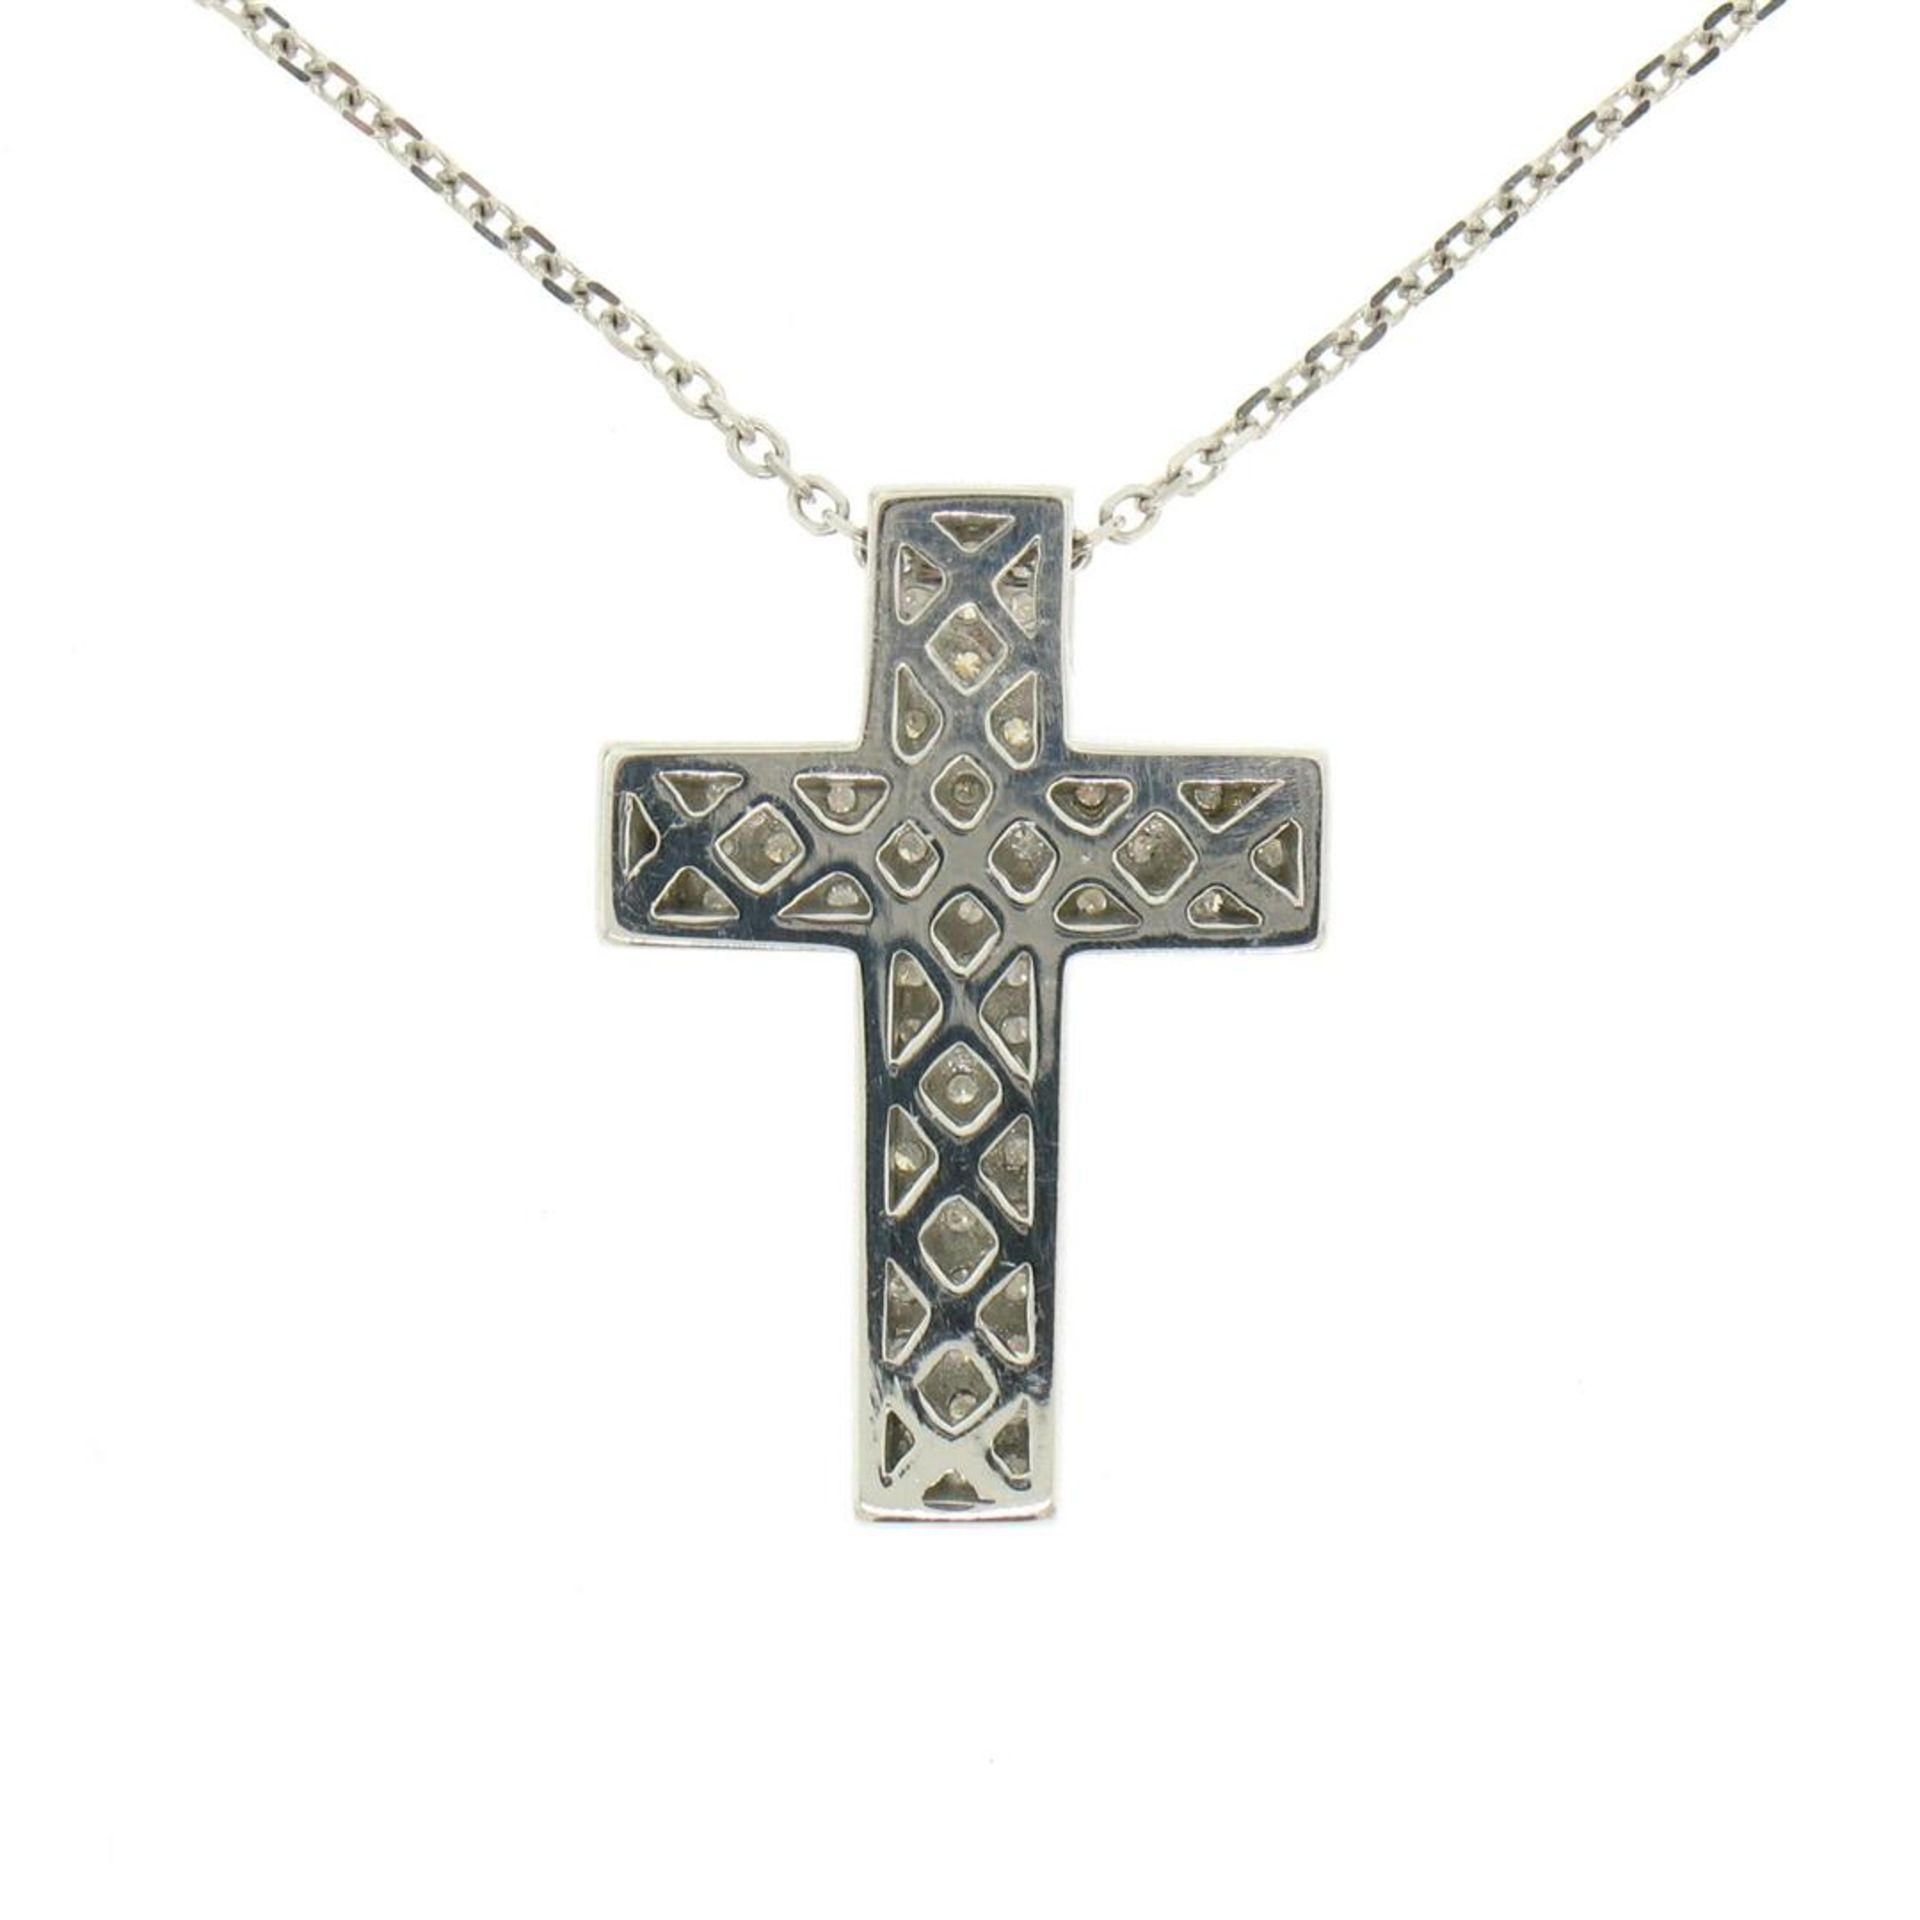 14K White Gold 0.51 ctw Micro Pave Diamond Cross Pendant w/ 18" Cable Link Chain - Image 5 of 8